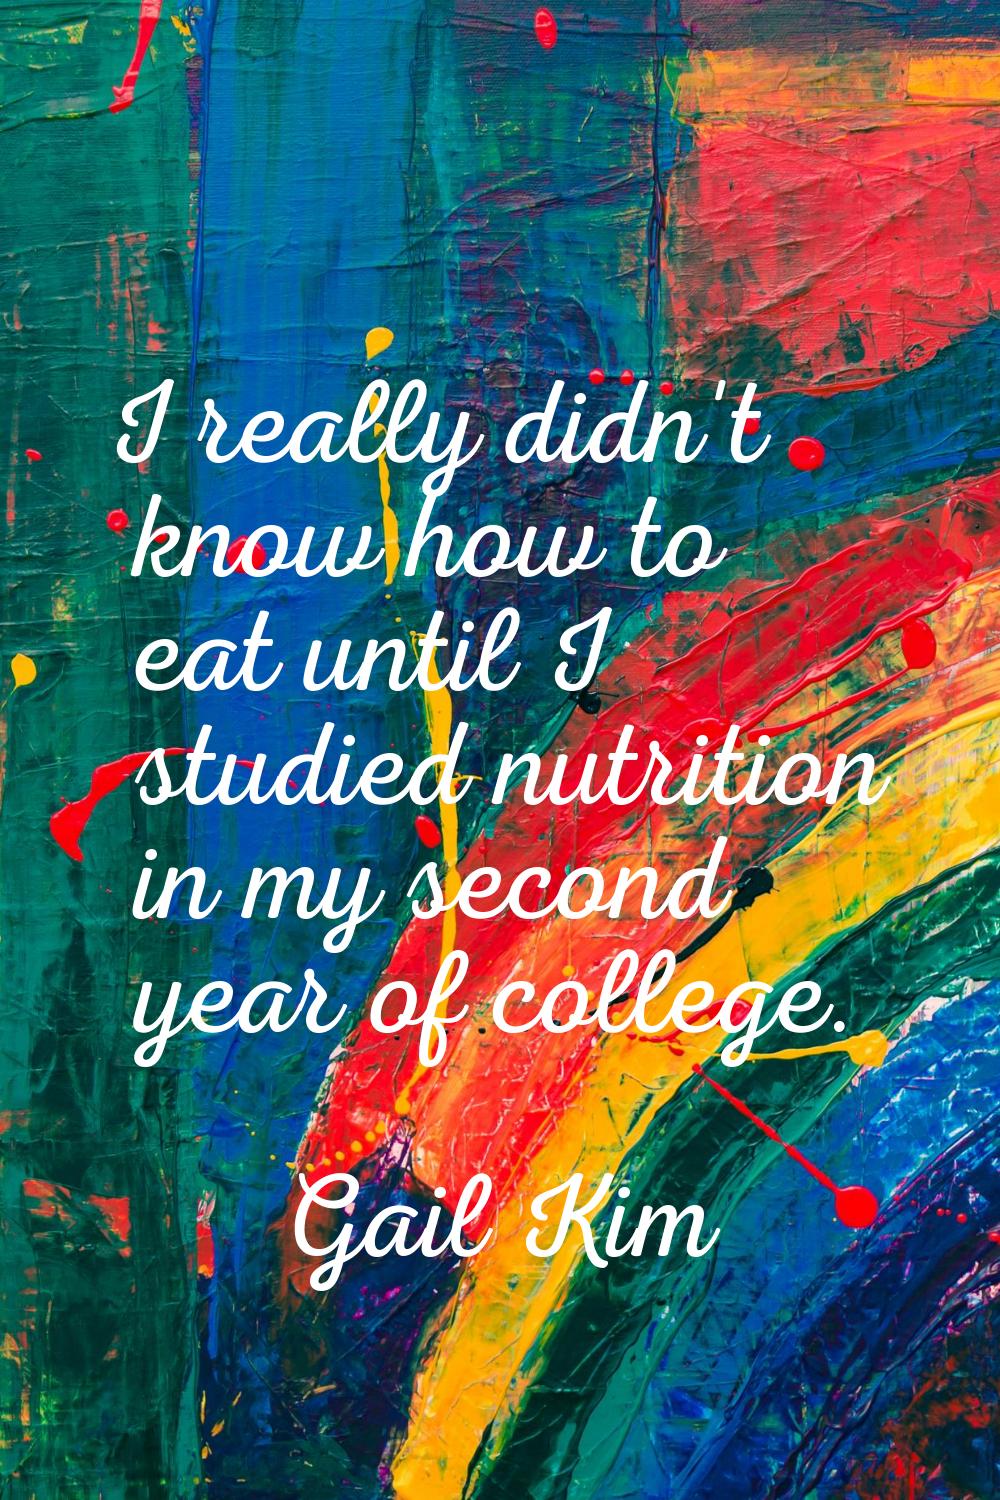 I really didn't know how to eat until I studied nutrition in my second year of college.